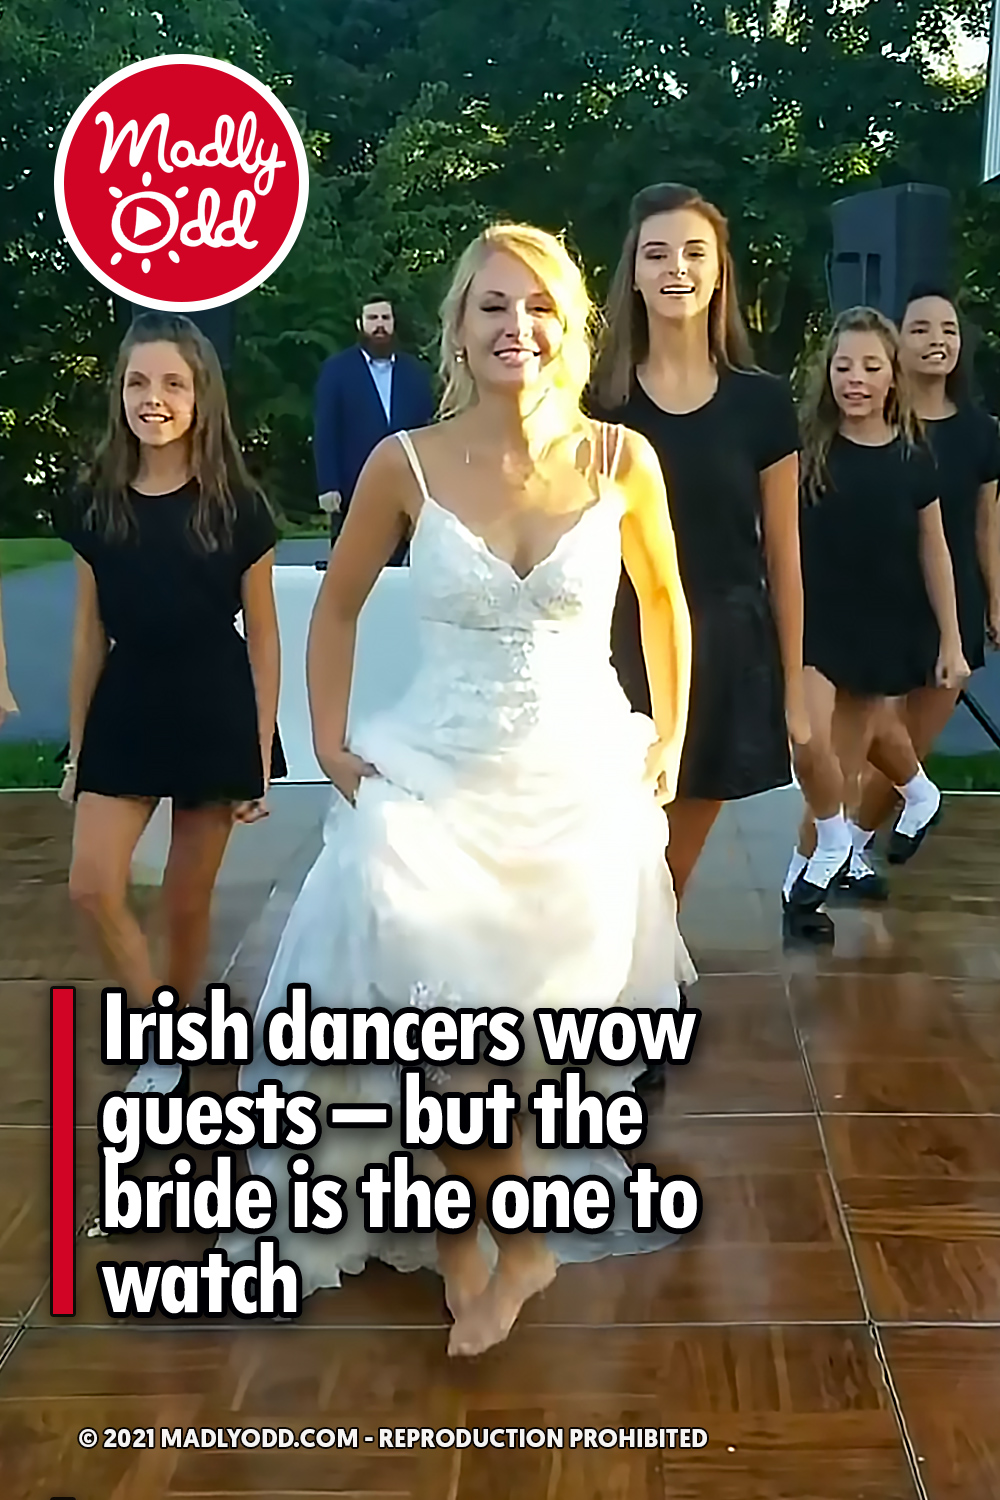 Irish dancers wow guests – but the bride is the one to watch